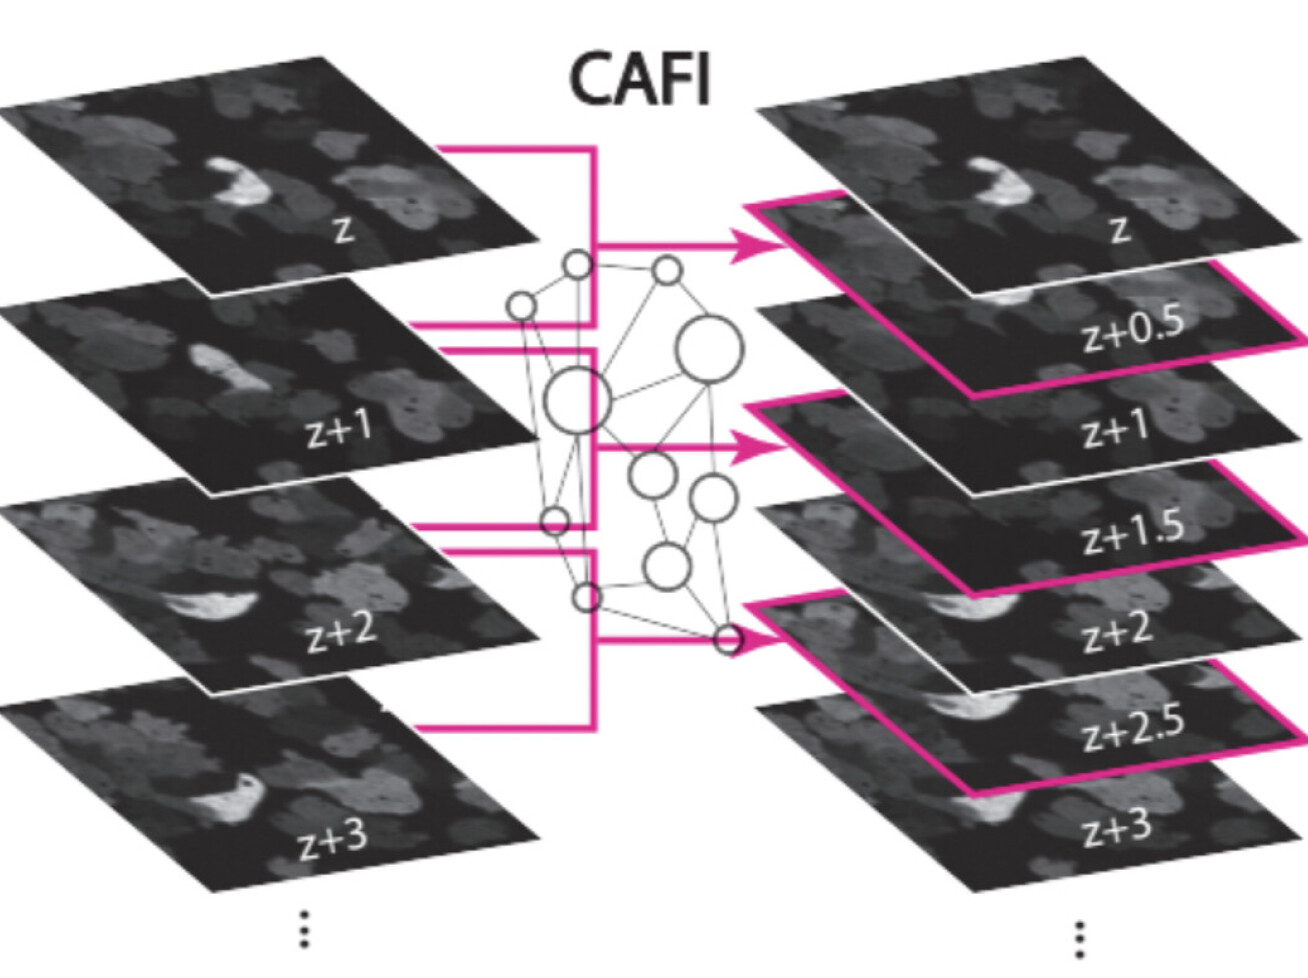 A schematic representation of CAFI – which inserts new interpolated images in between consecutive frames.